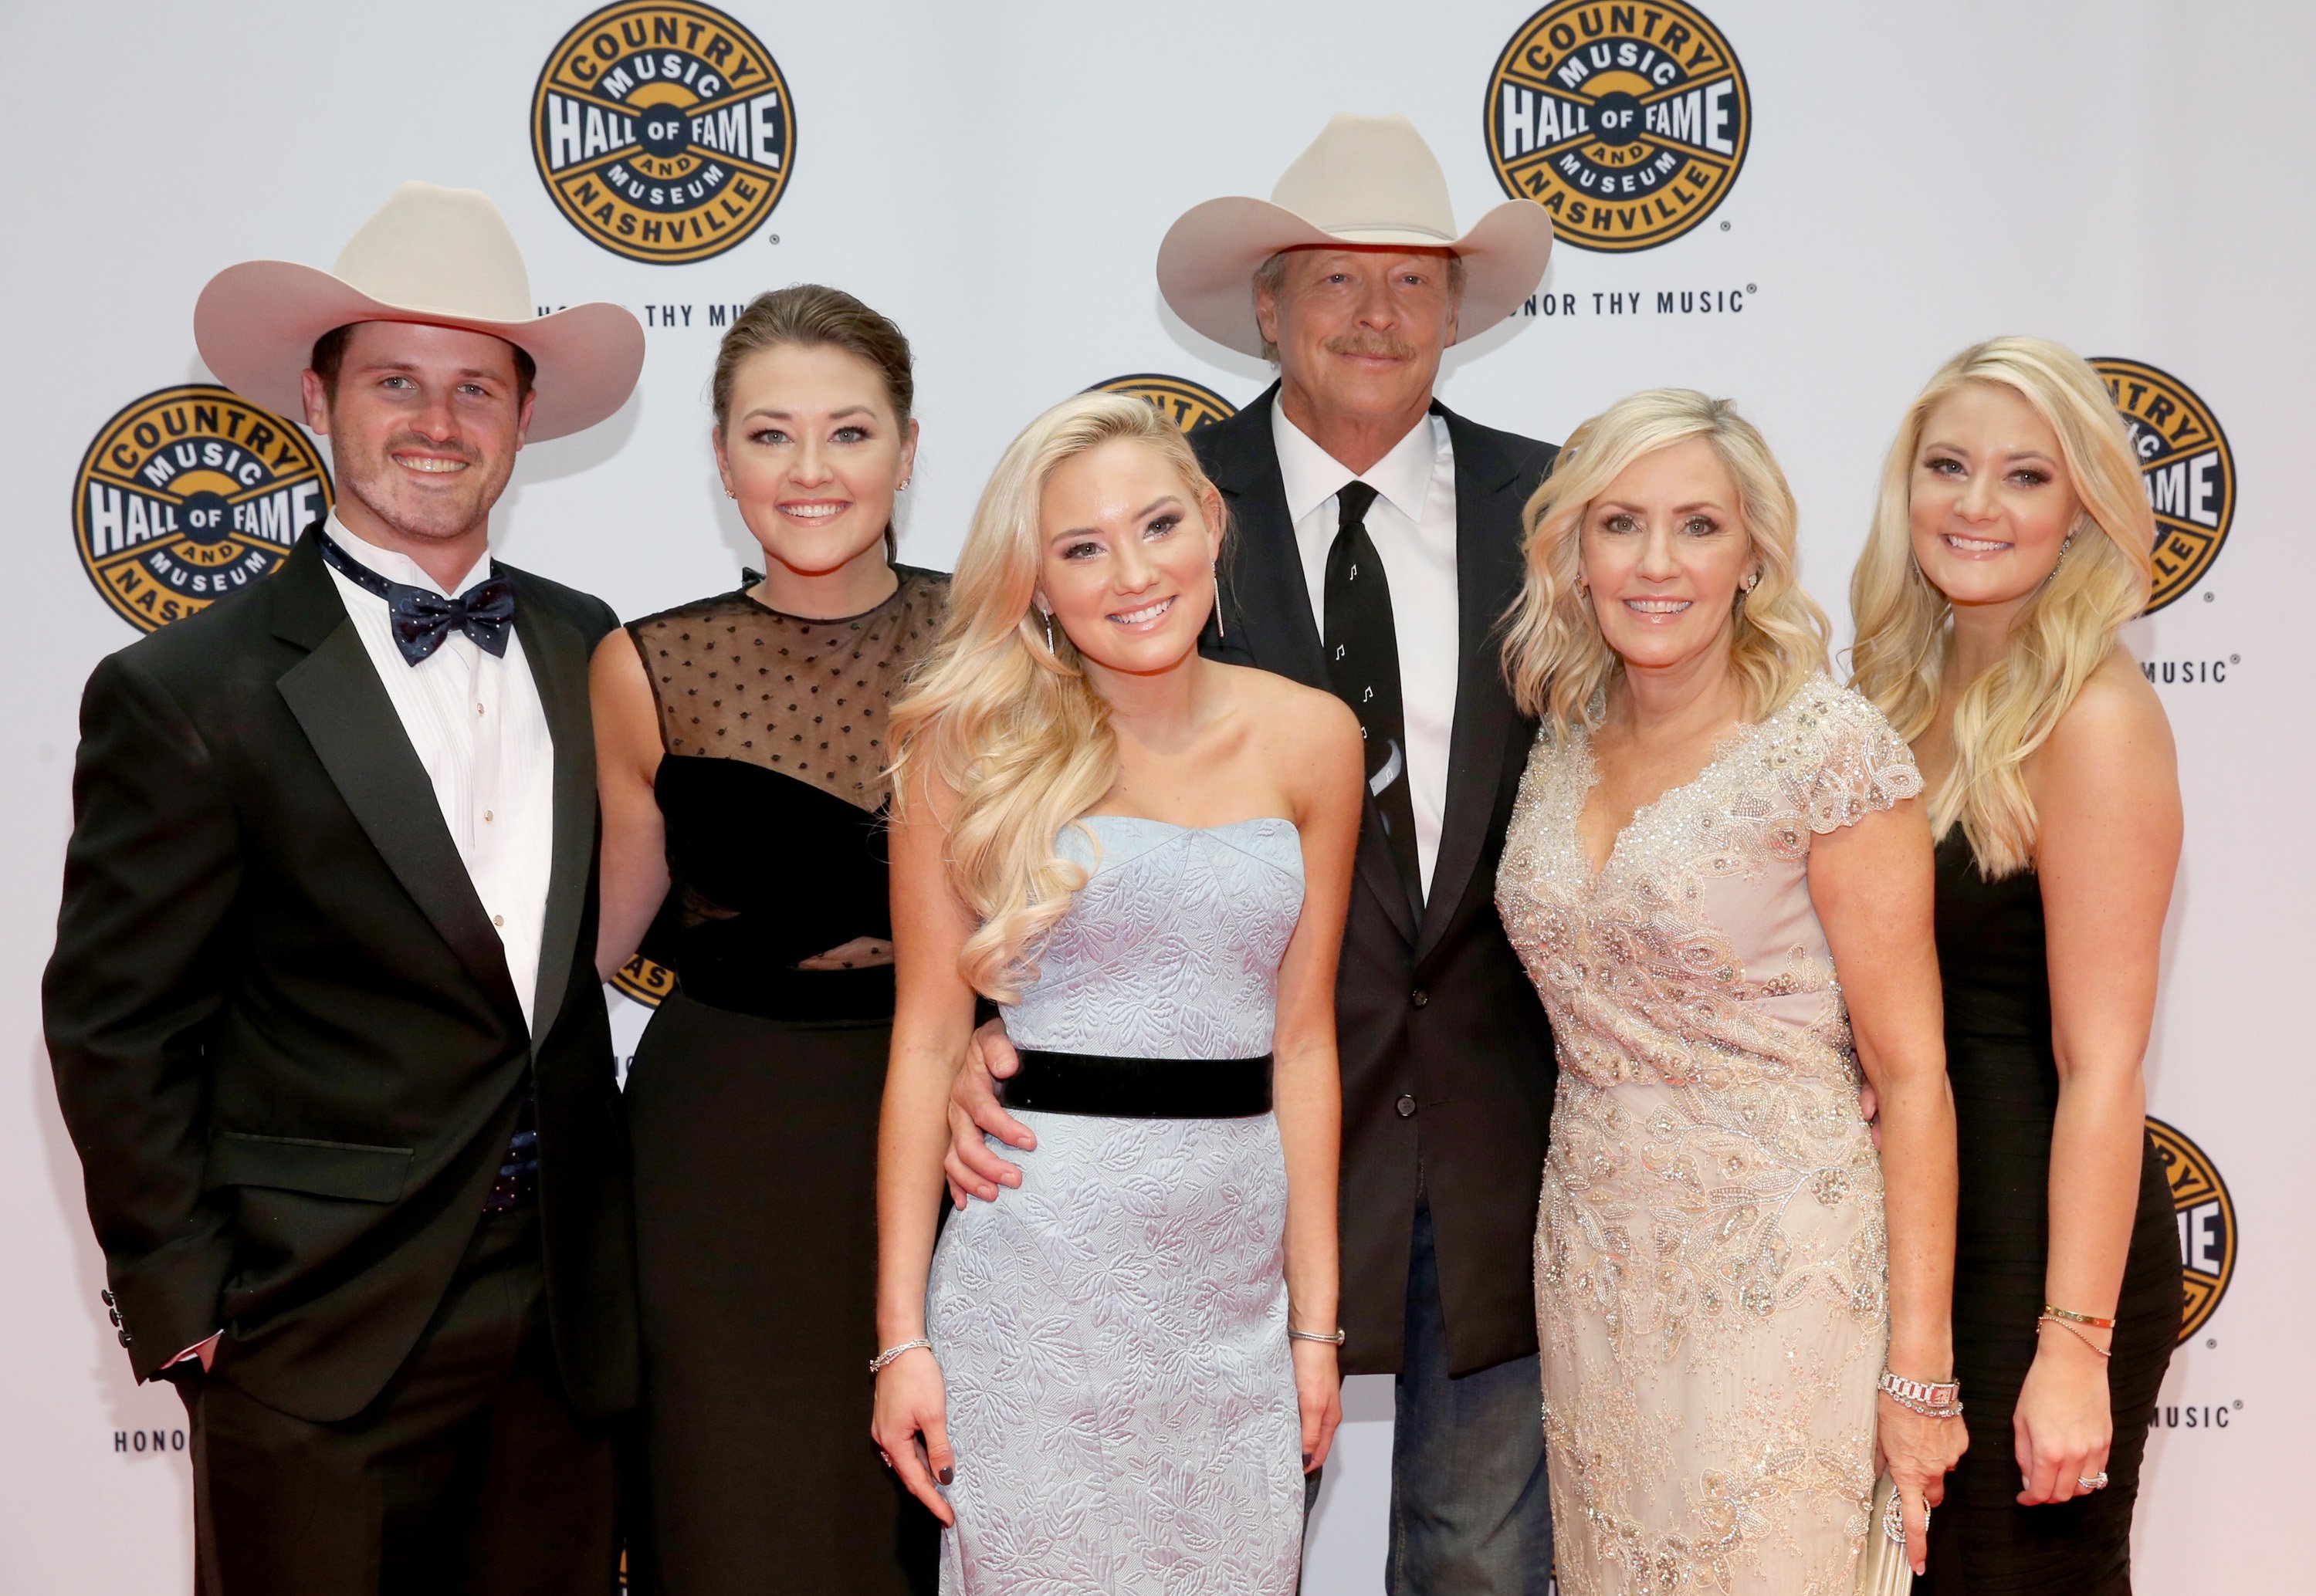 (L-R) Ben Selecman, Mattie Jackson, Dani Jackson, Denise Jackson, and Alexandra Jackson attend the Country Music Hall of Fame and Museum Medallion Ceremony at Country Music Hall of Fame and Museum on October 22, 2017 in Nashville, Tennessee. ┃Source: Getty Images